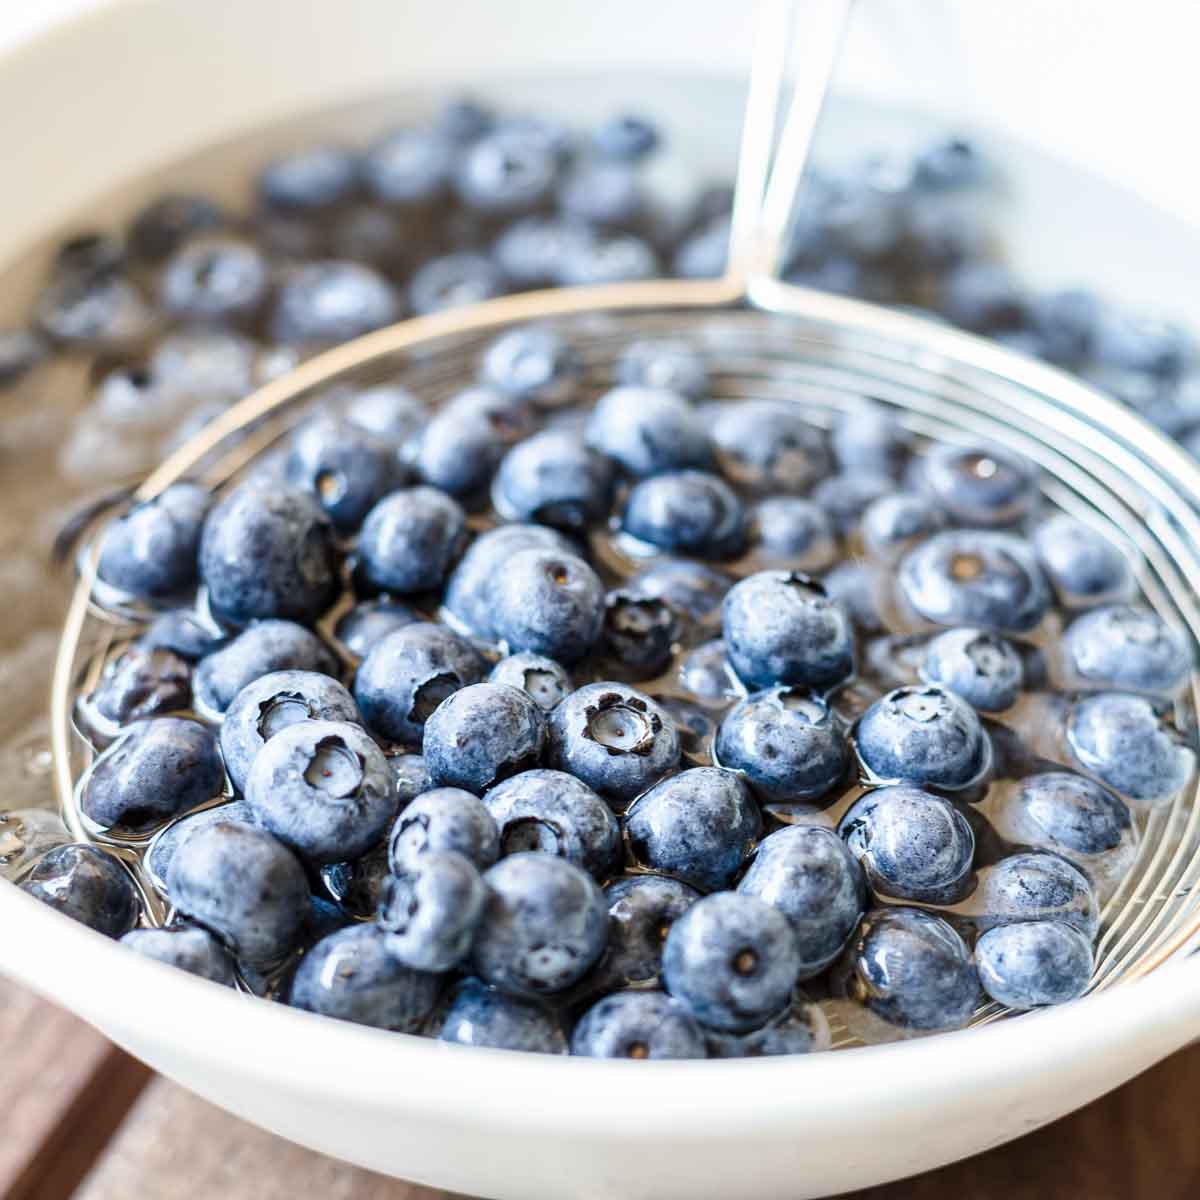 Blueberries in a white bowl on a wooden table.